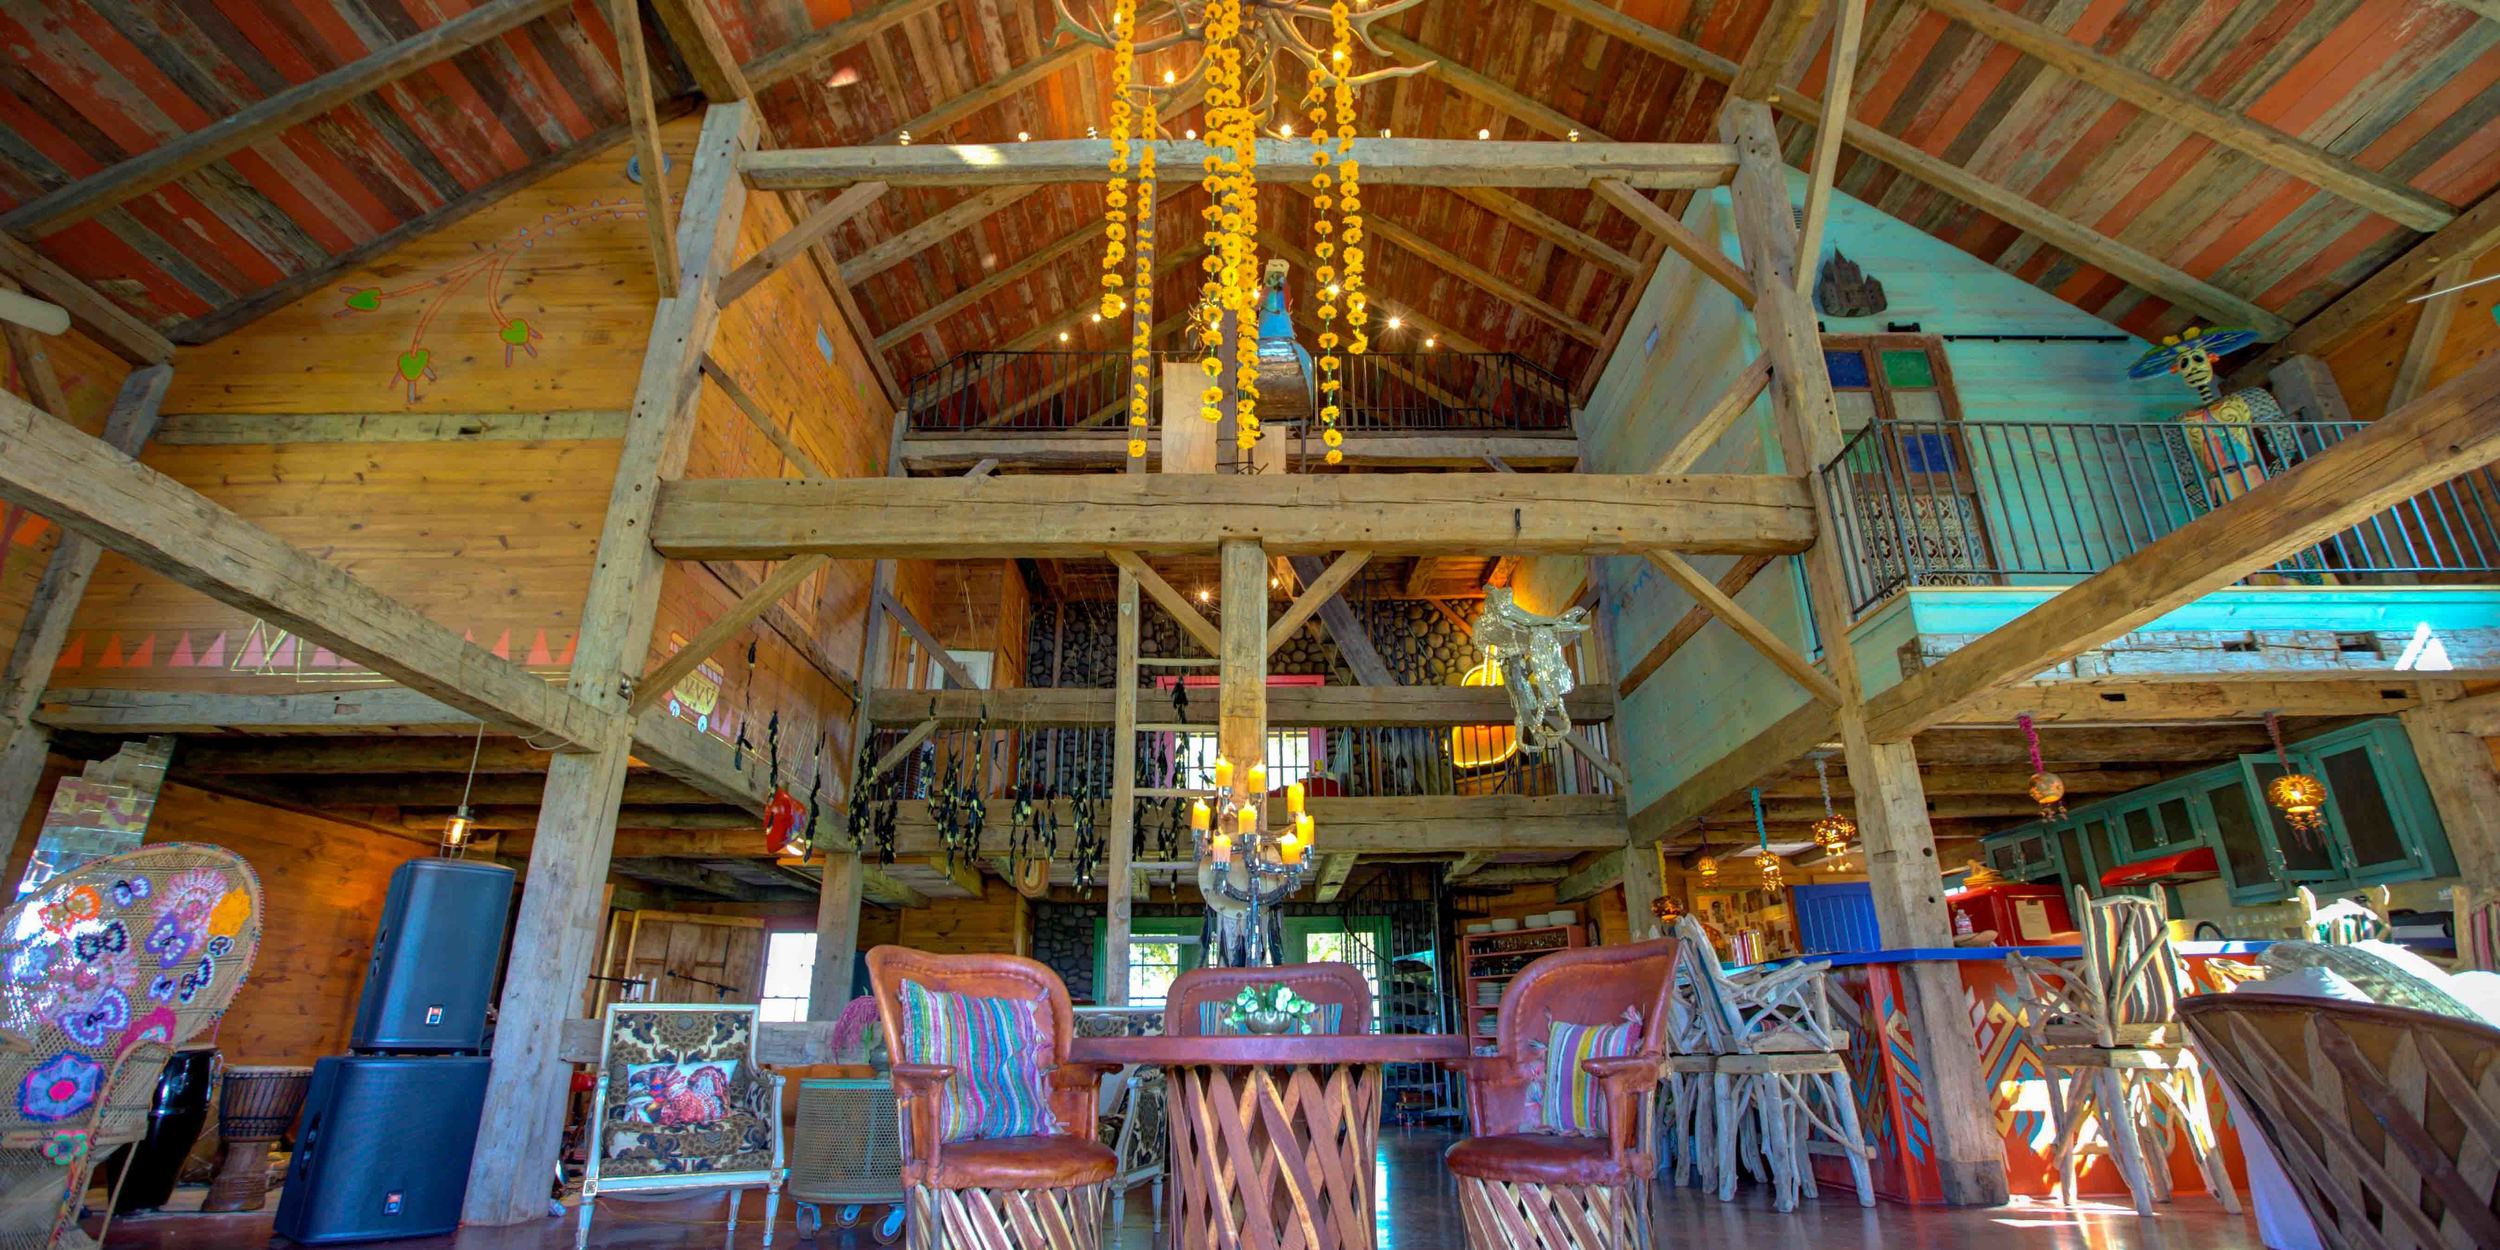 The barn serves as Rancho Pillow's de facto great room, gathering spot and mess hall